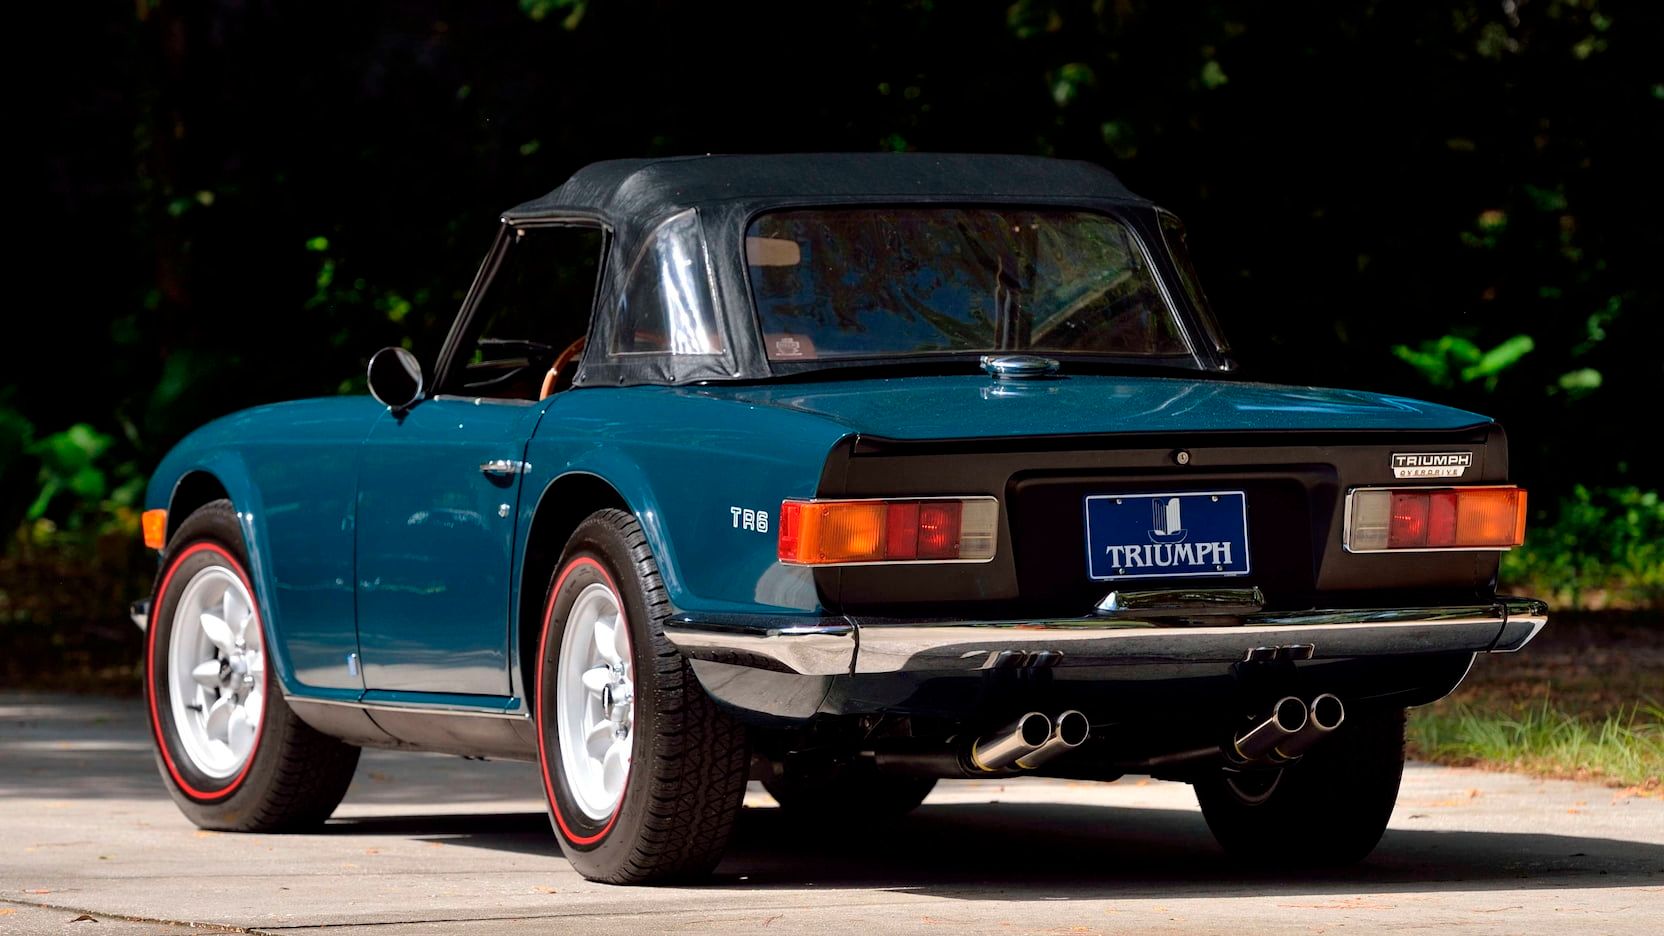 1972 Triumph TR6 parked with its roof up